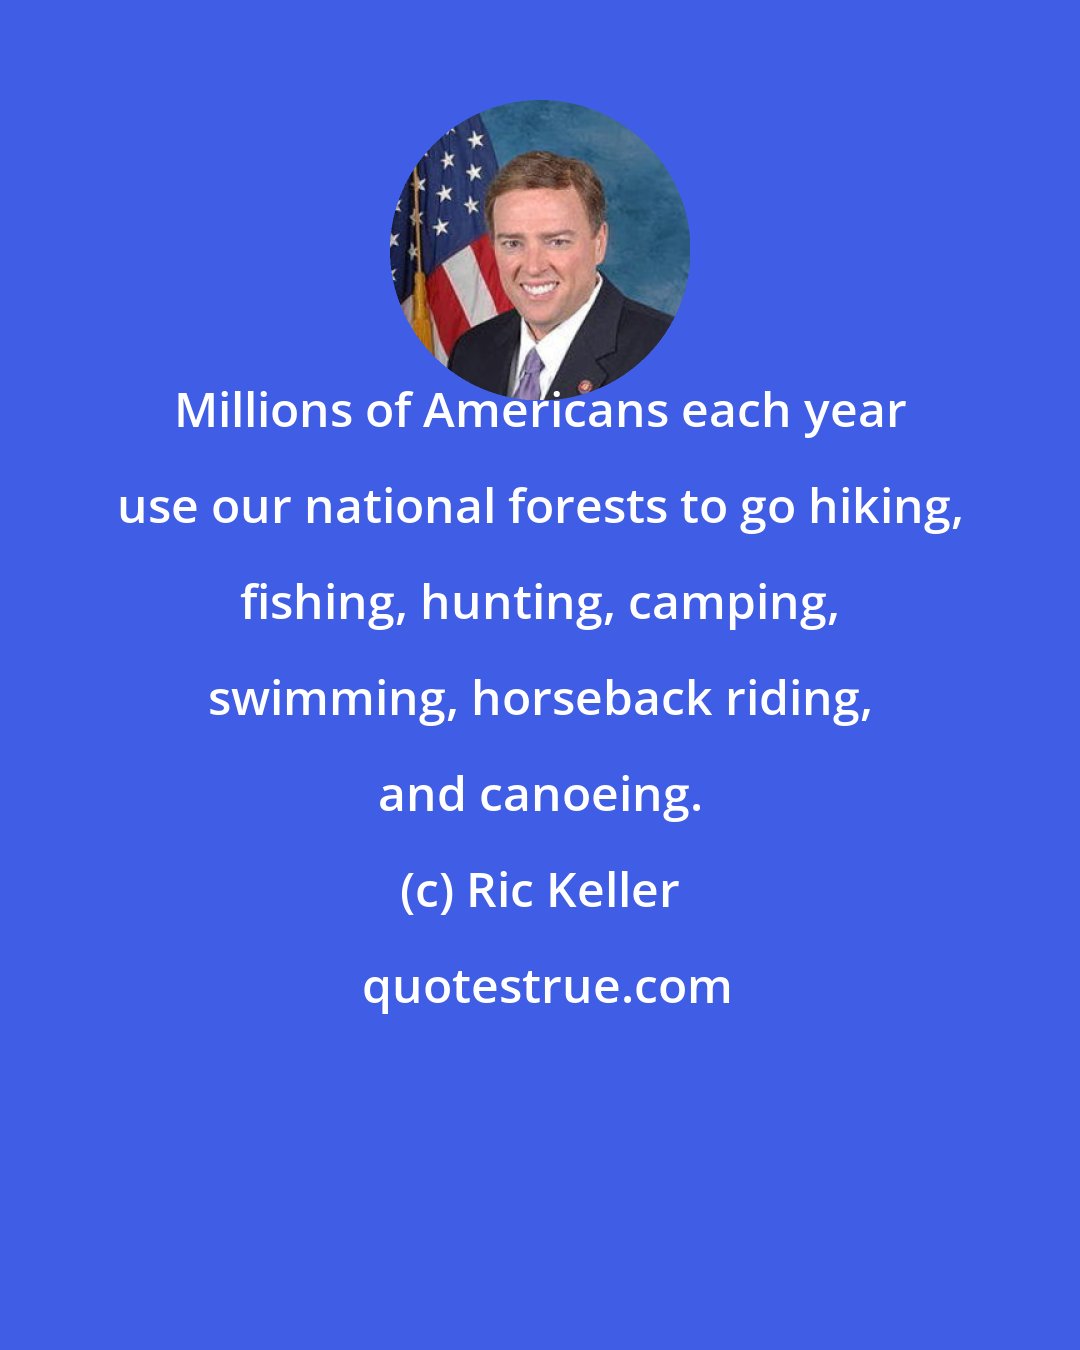 Ric Keller: Millions of Americans each year use our national forests to go hiking, fishing, hunting, camping, swimming, horseback riding, and canoeing.